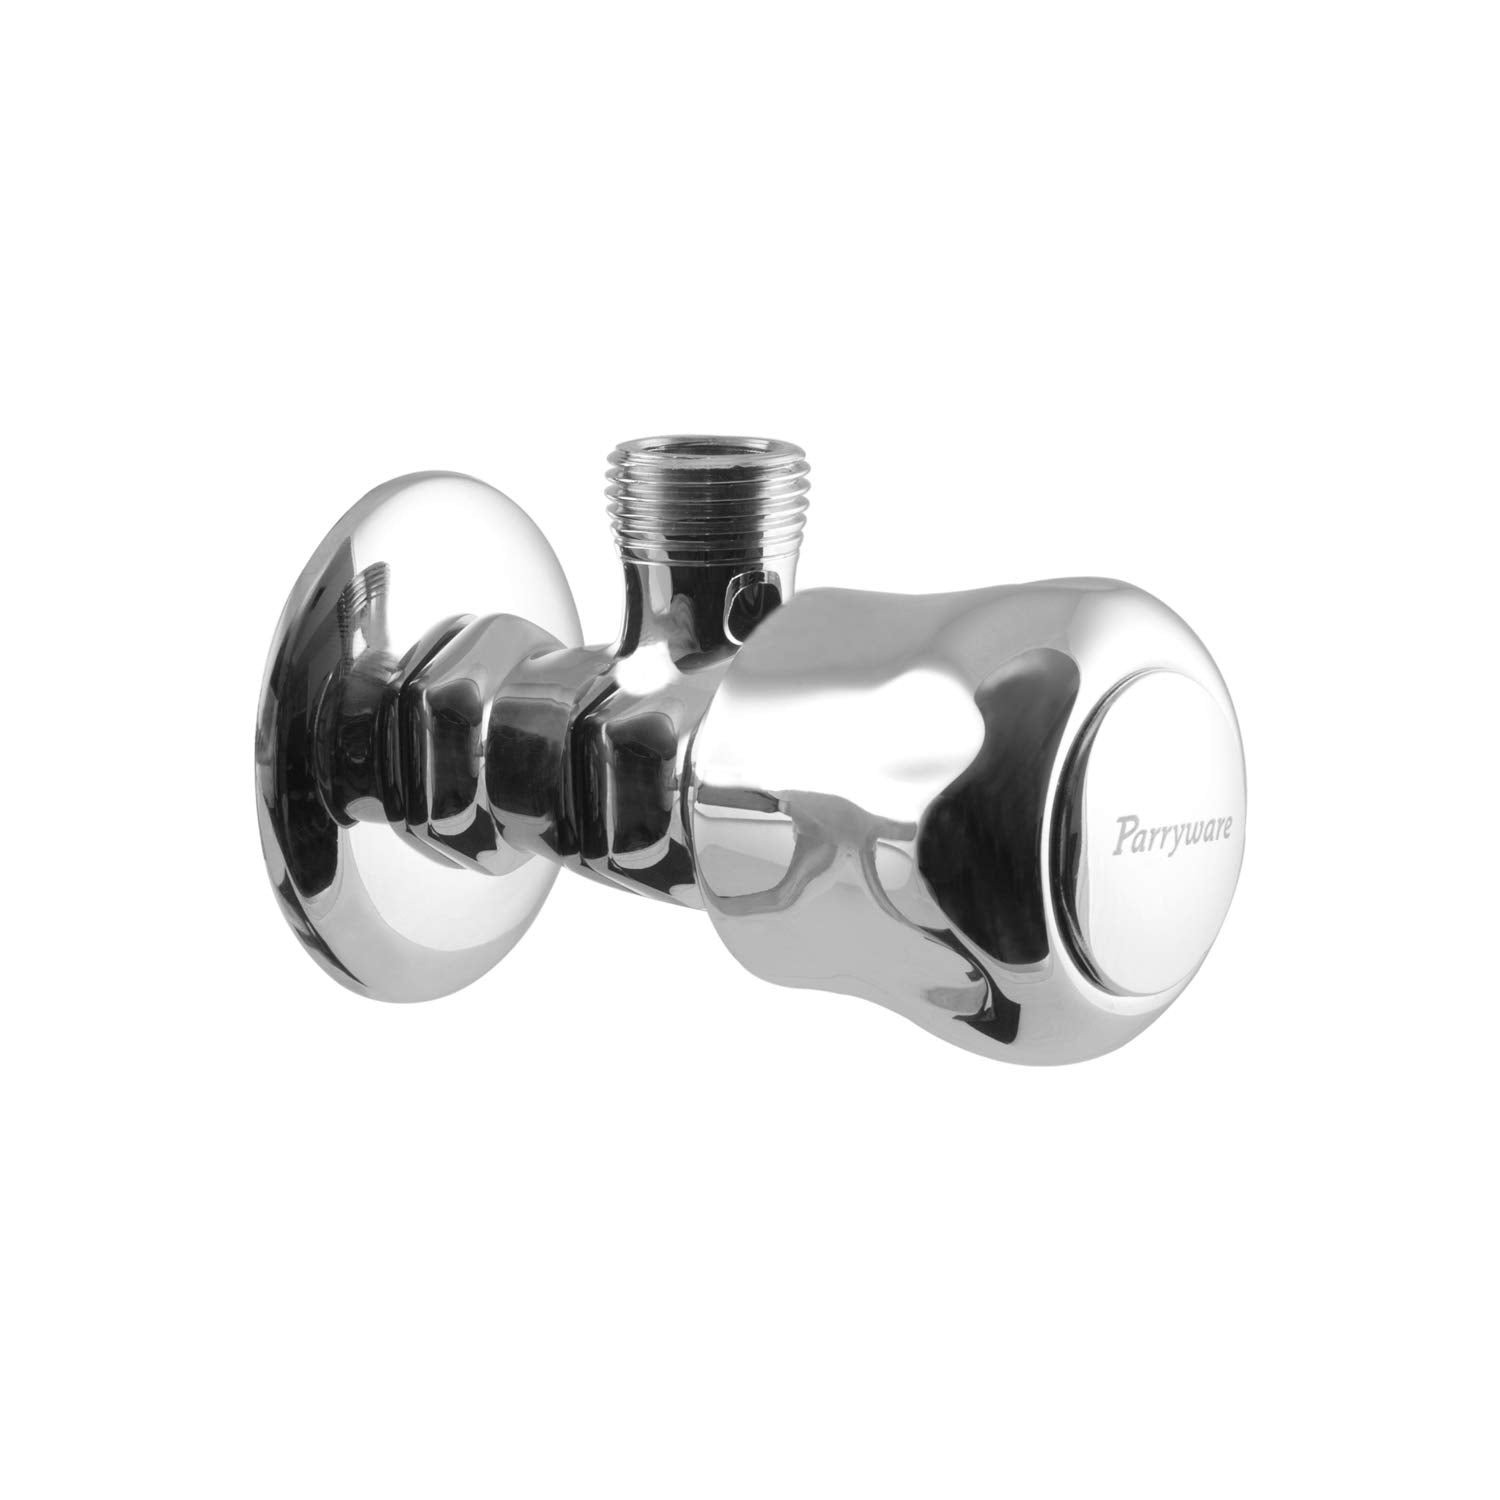 Parryware T3507A1 Jasper Angle Valve for Bathroom Fixtures/Fittings